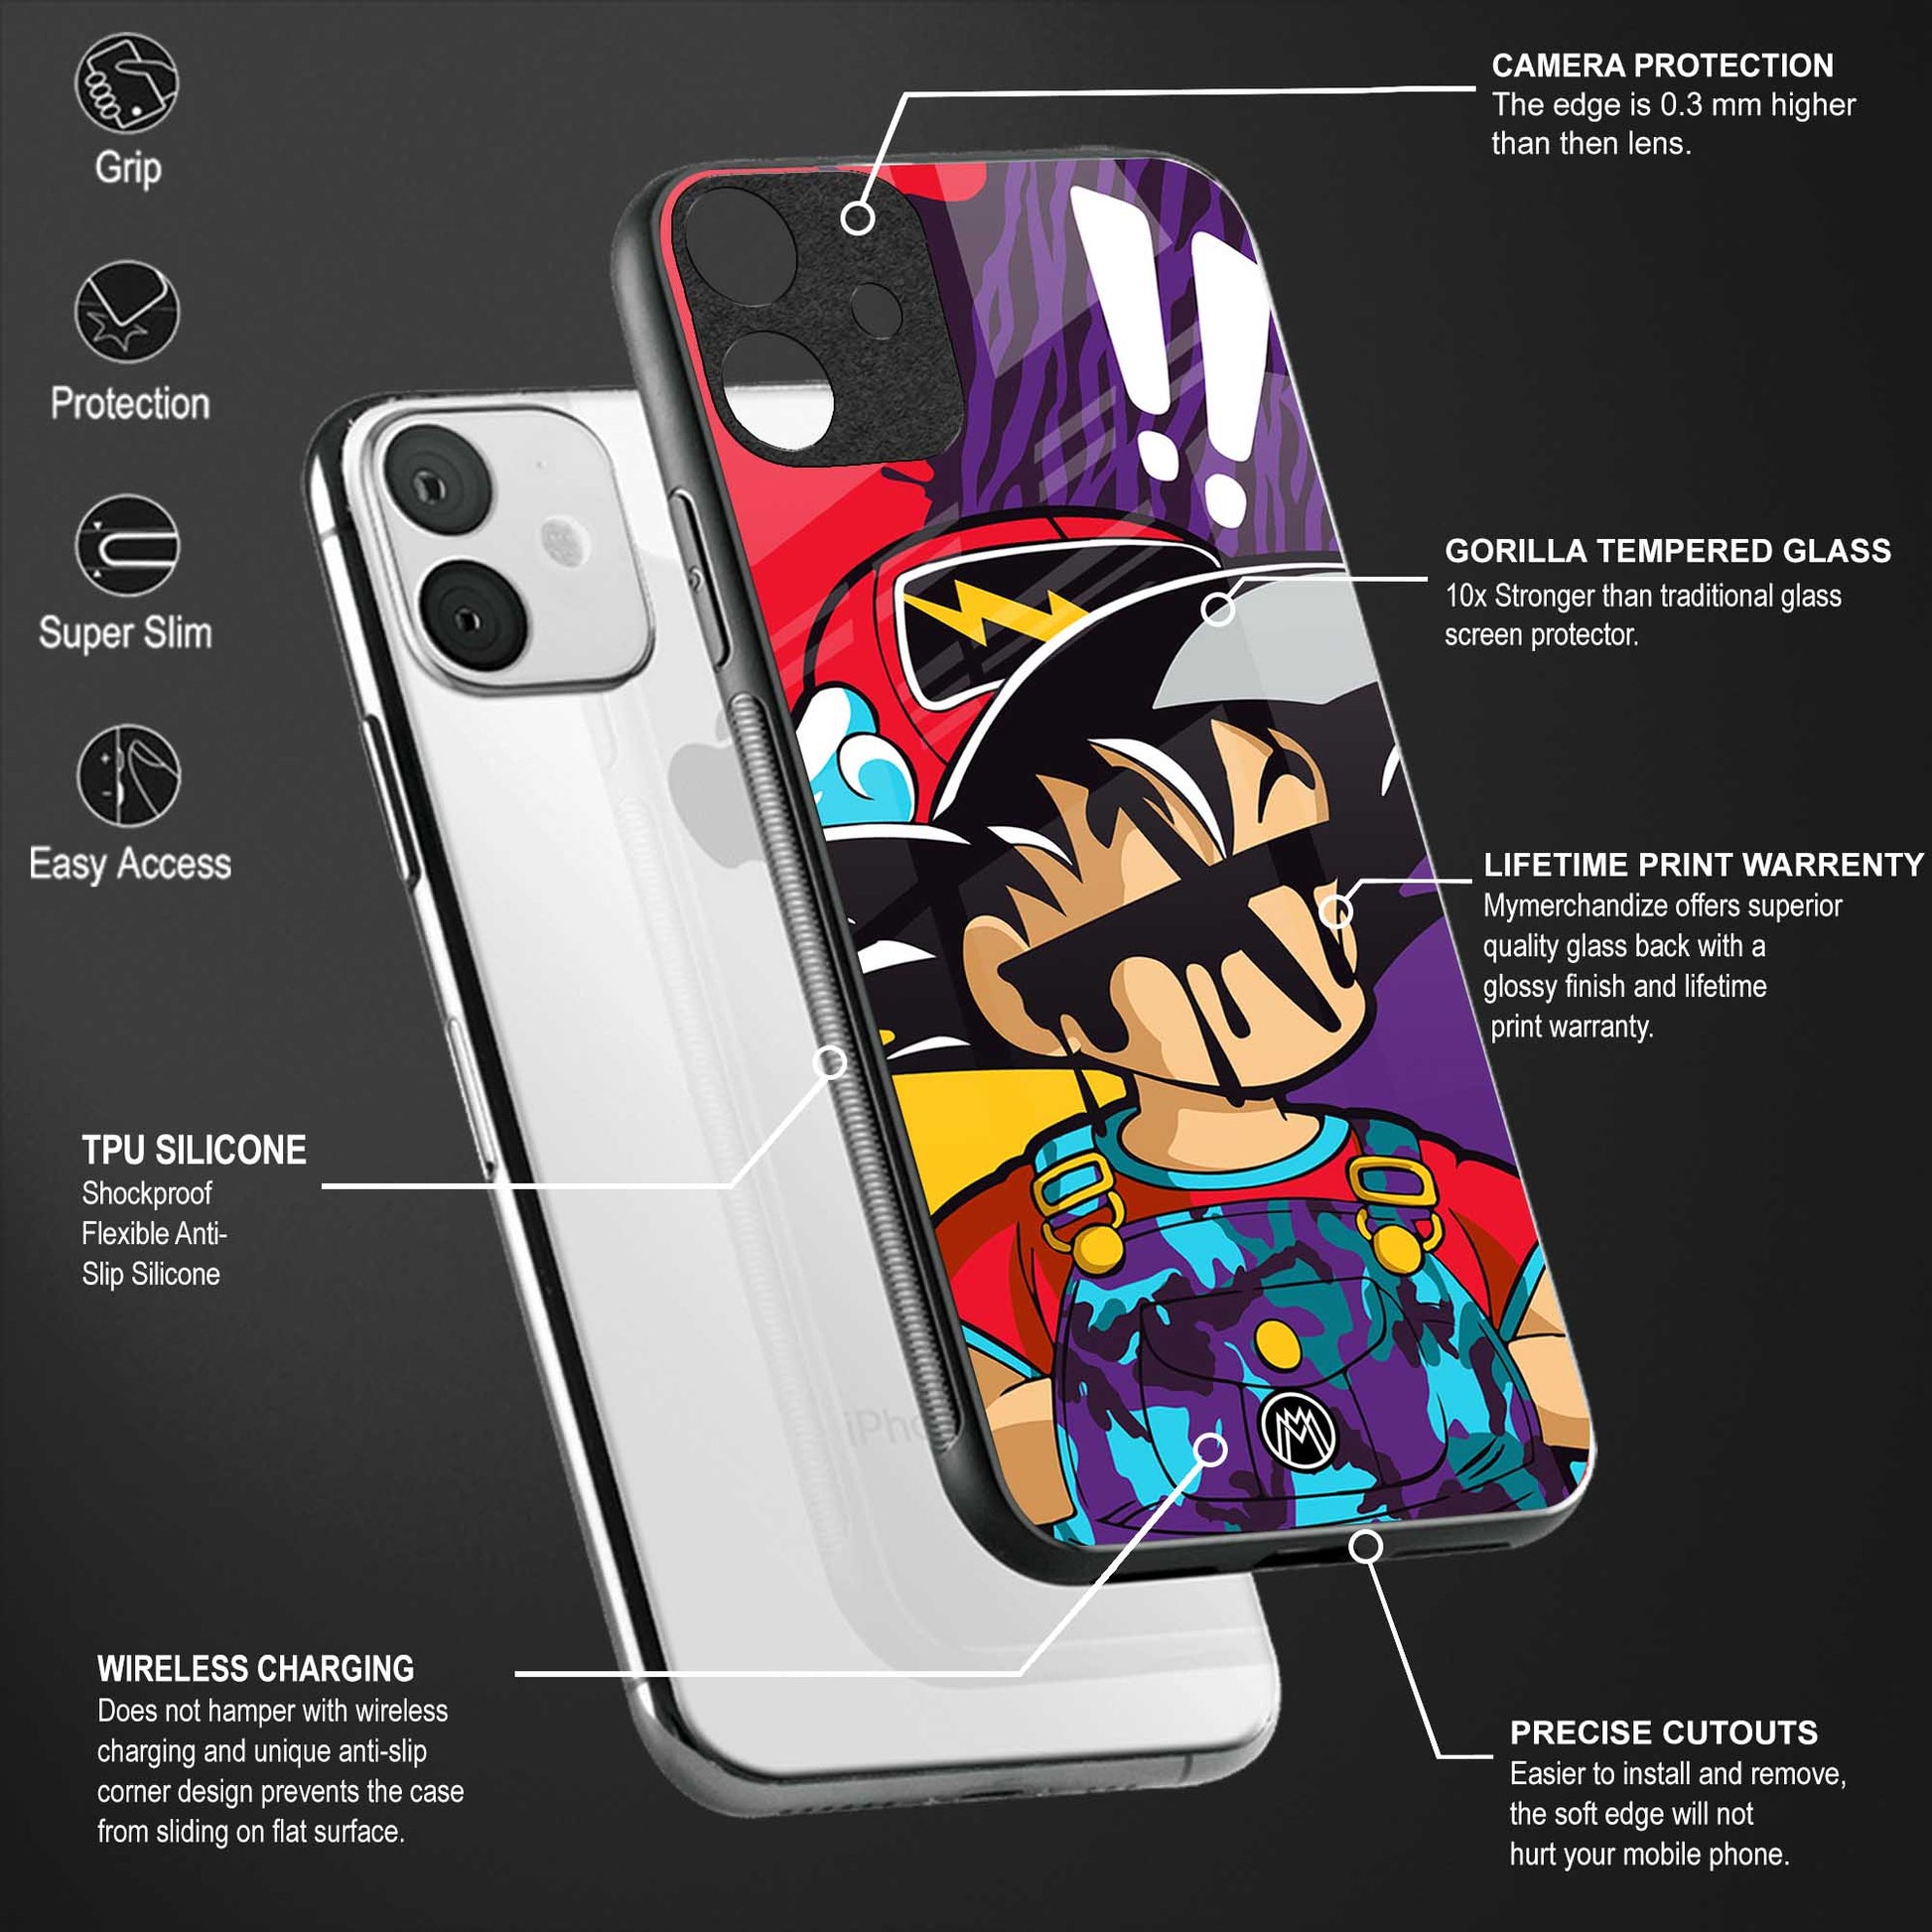 dragon ball z art phone cover for oppo a15